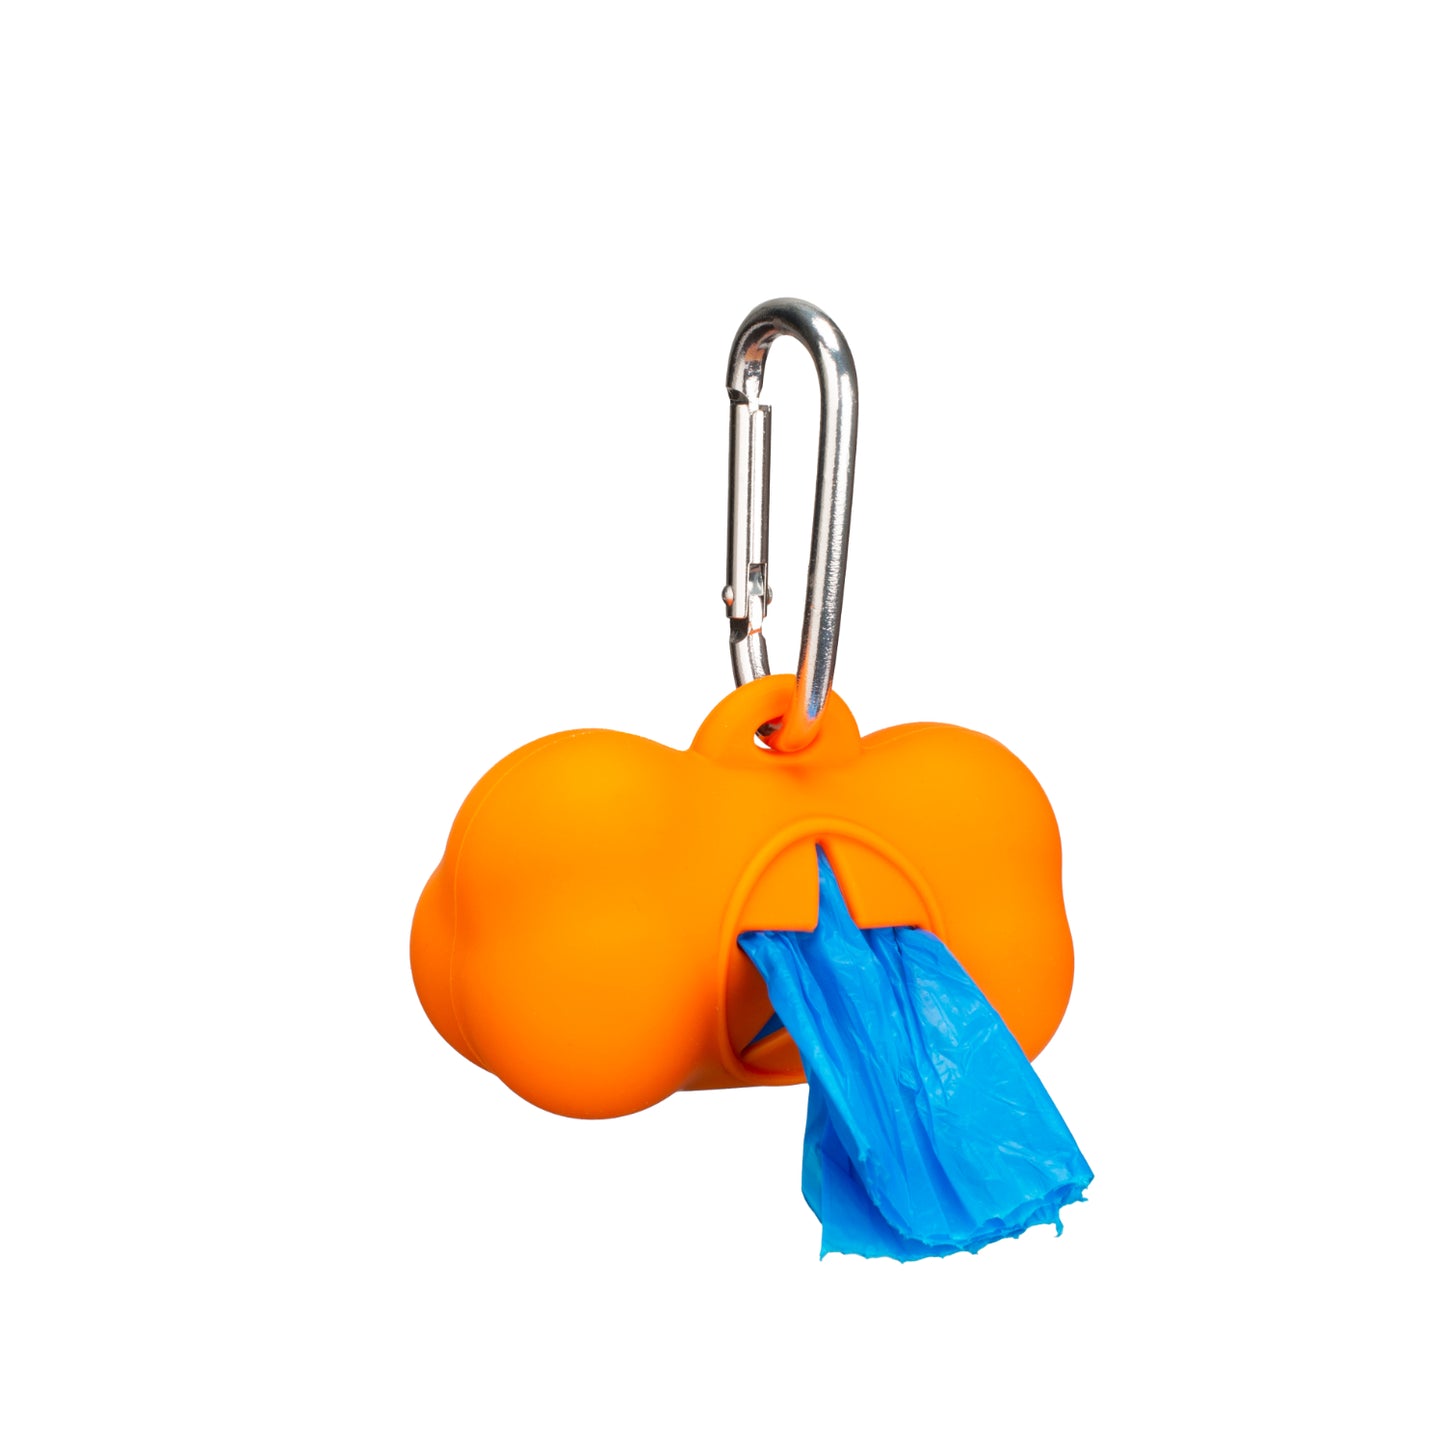 Bake of orange, bone-shaped doo bag holder with doo bags coming out